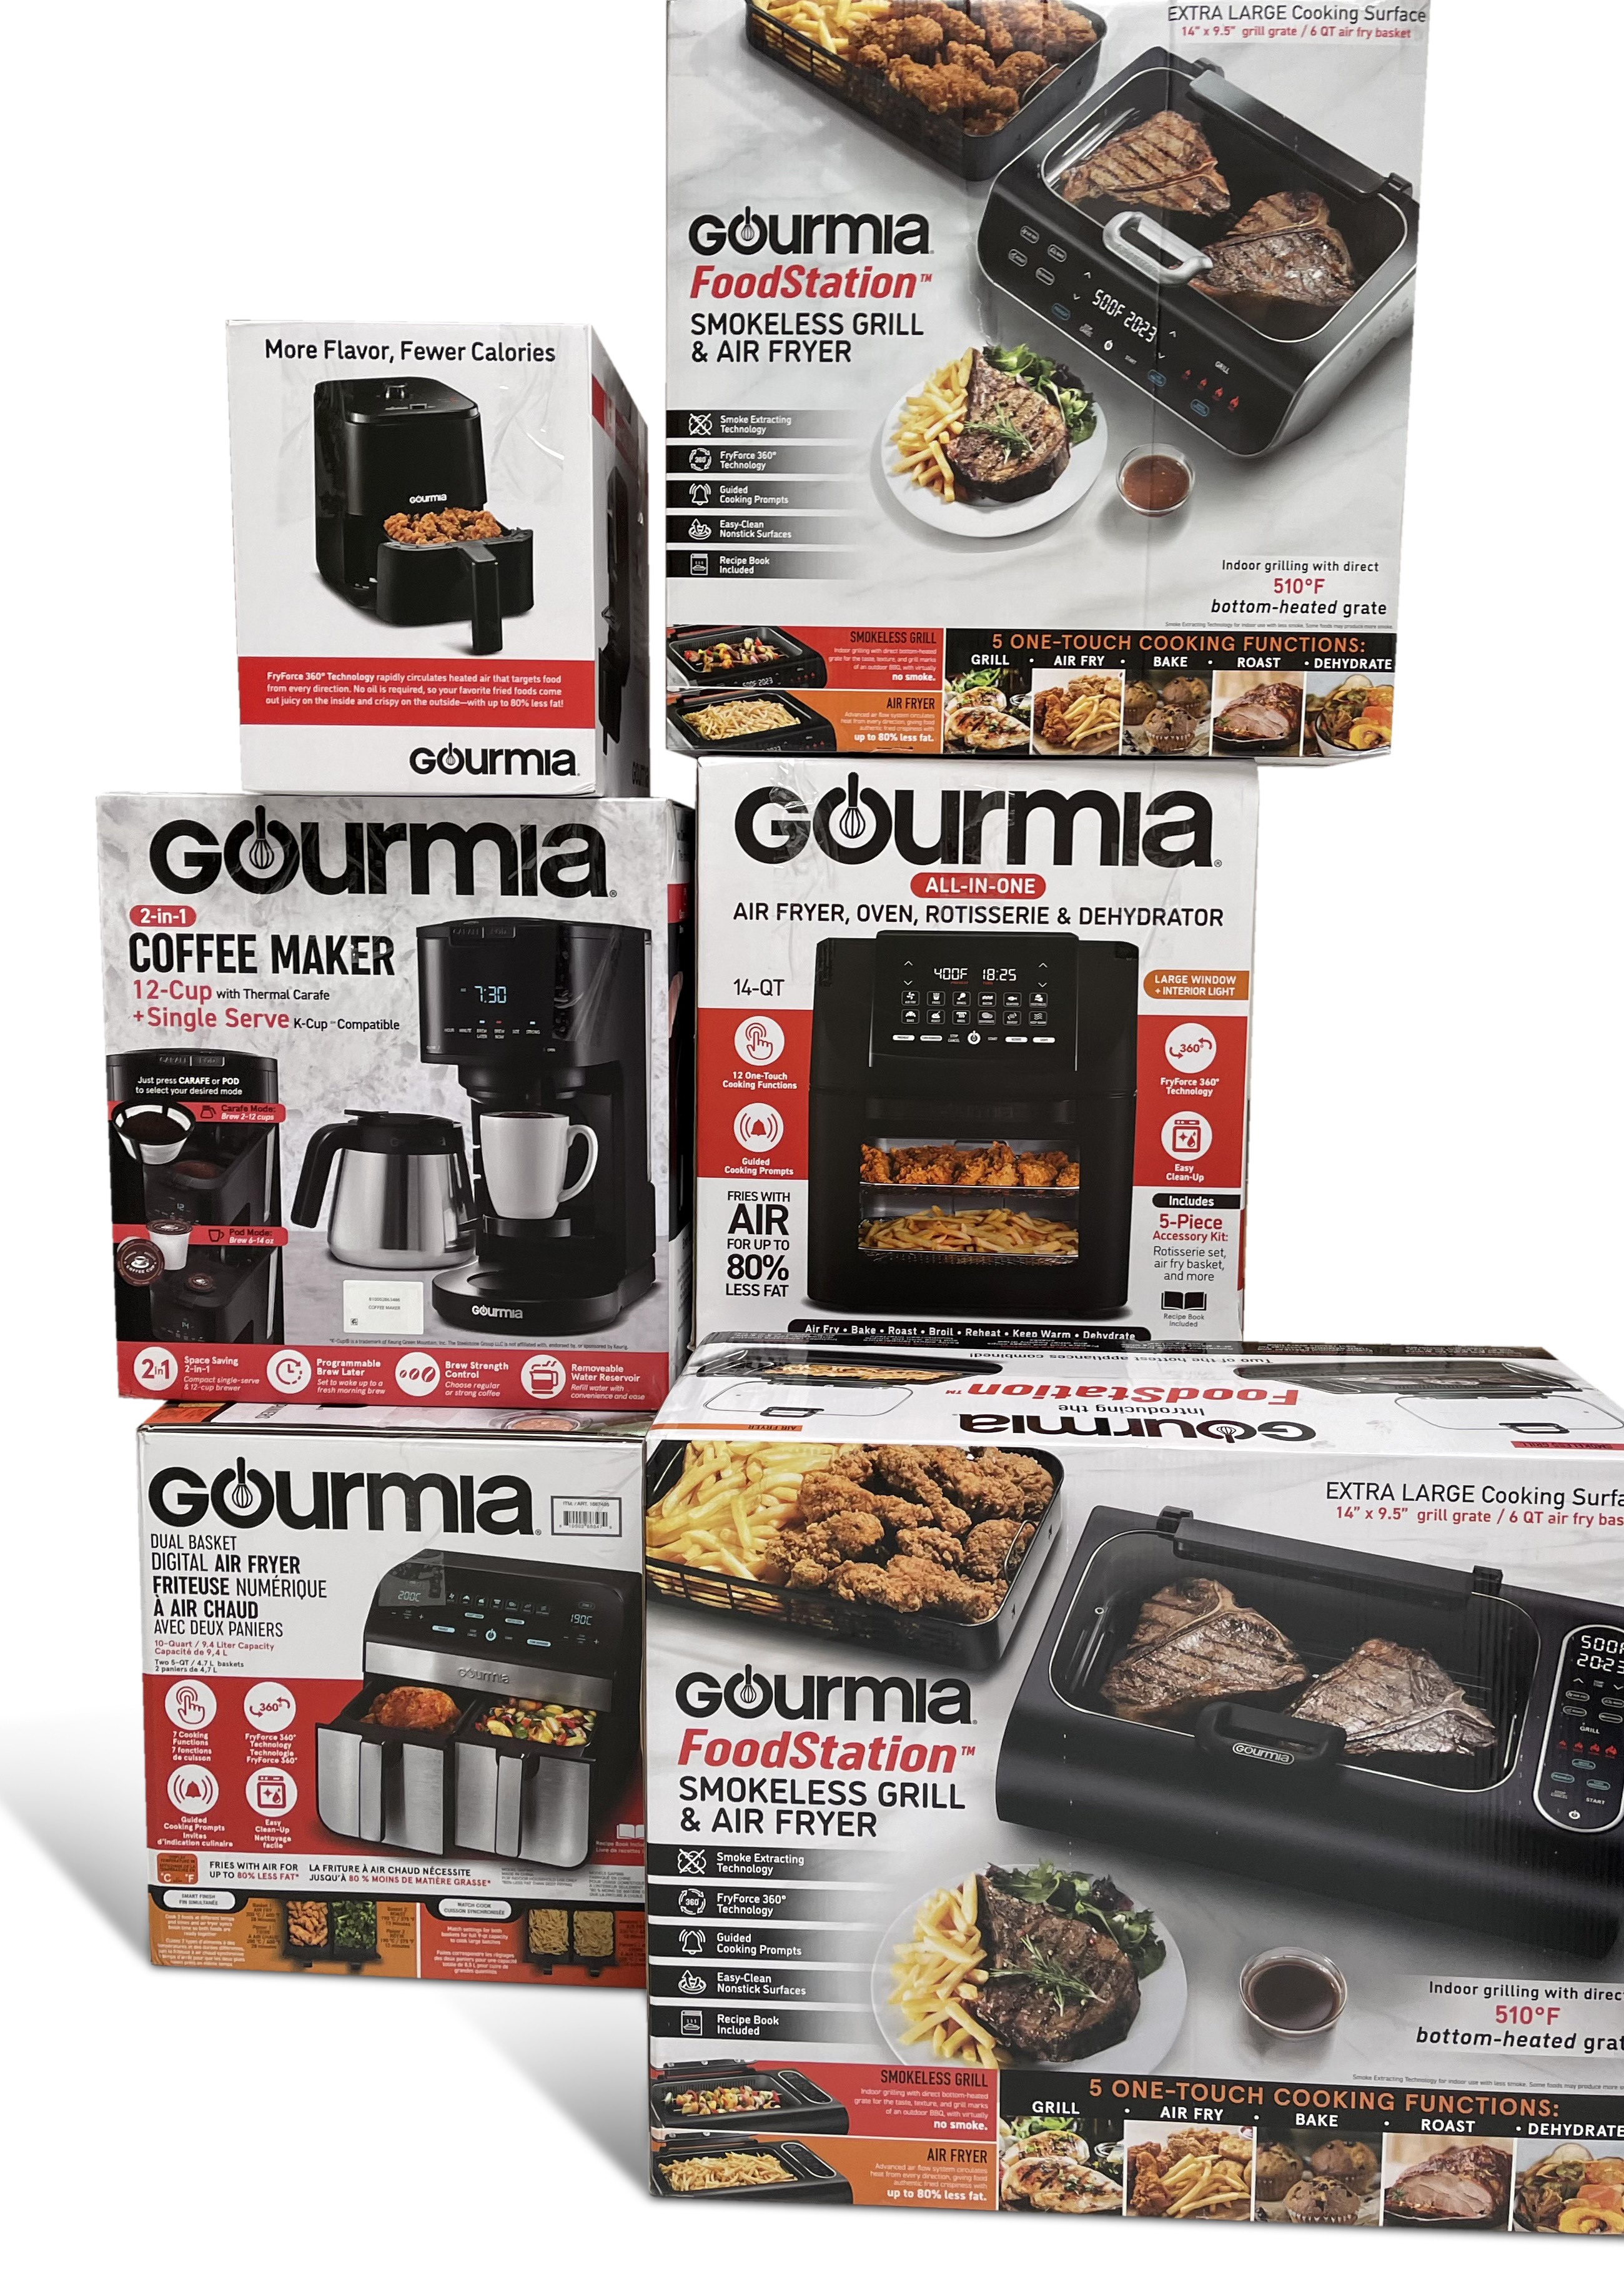  Gourmia 5-in-1 FoodStation Smokeless Grill & Air Fryer